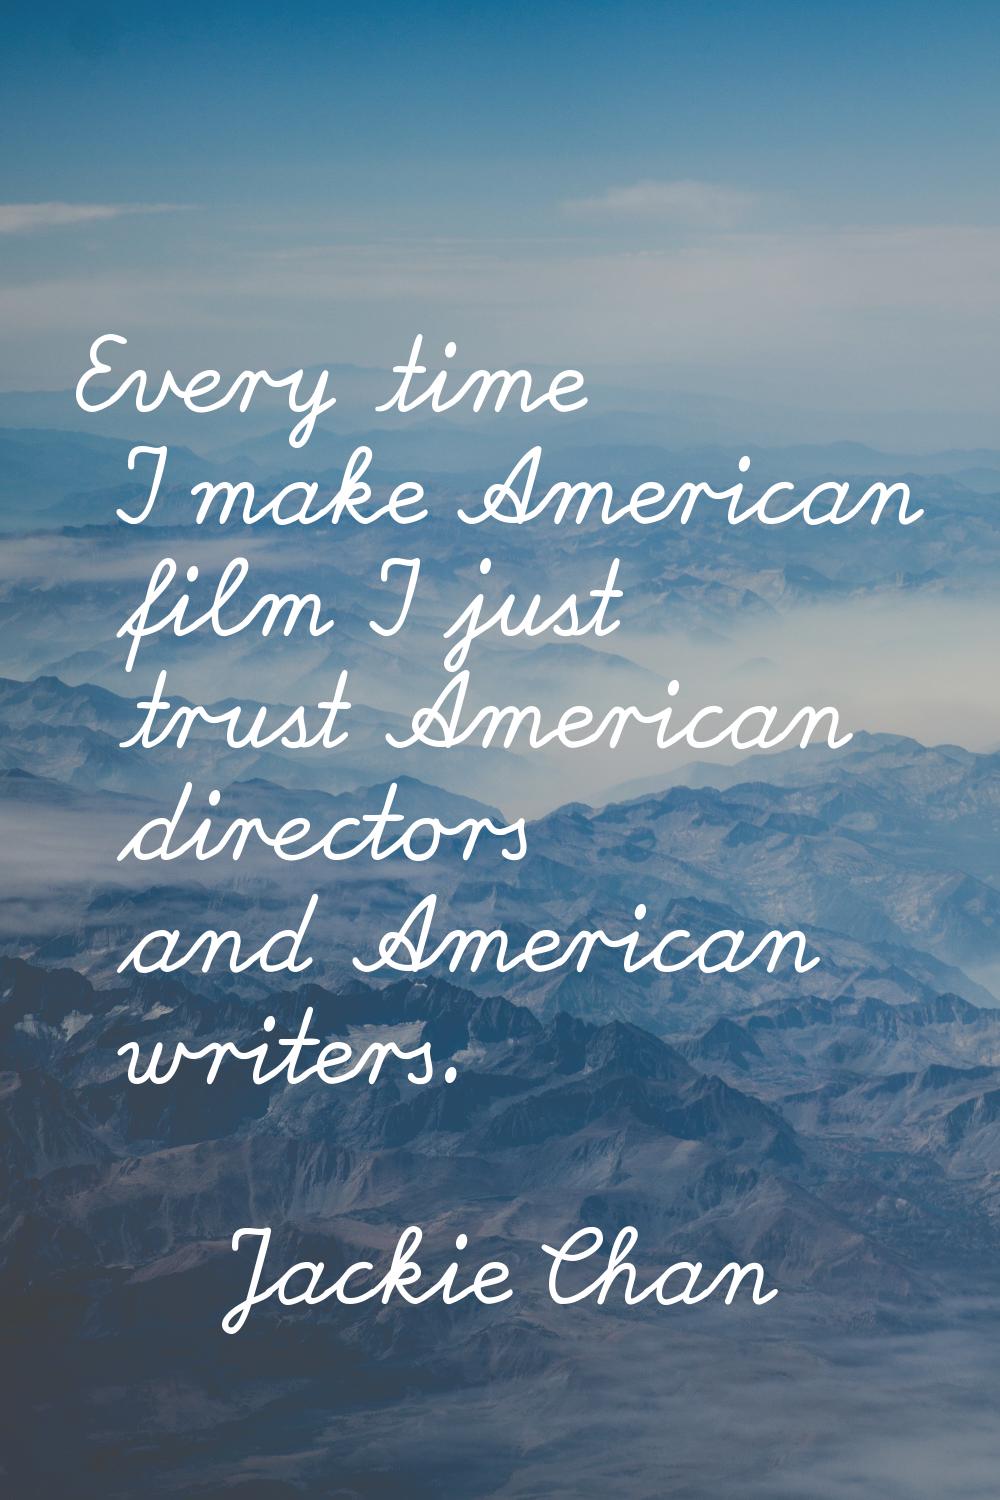 Every time I make American film I just trust American directors and American writers.